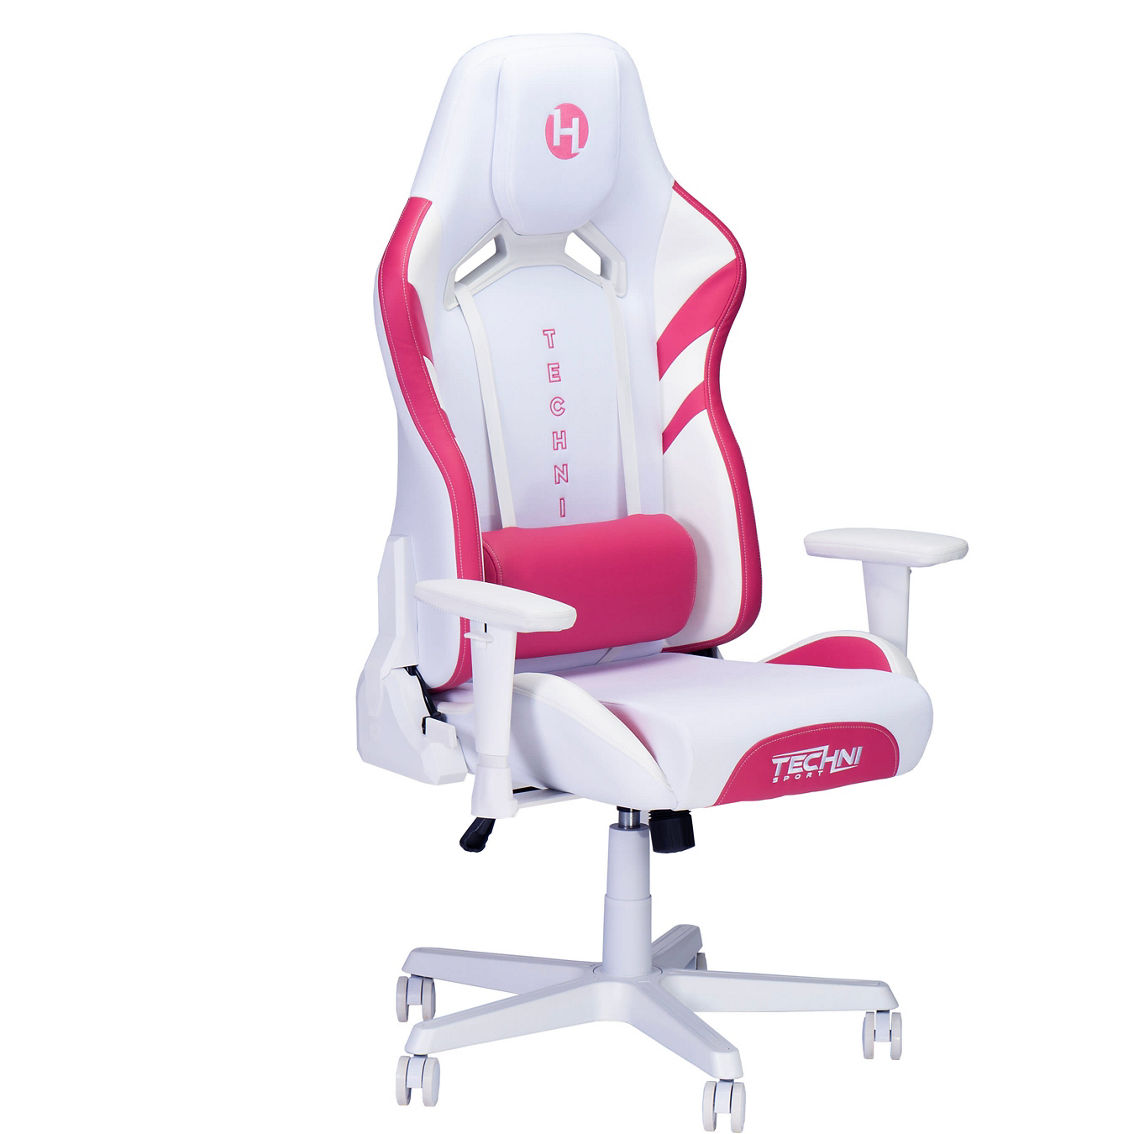 Techni Sport Tsf72 Echo Gaming Chair - White With Pink | Gaming ...